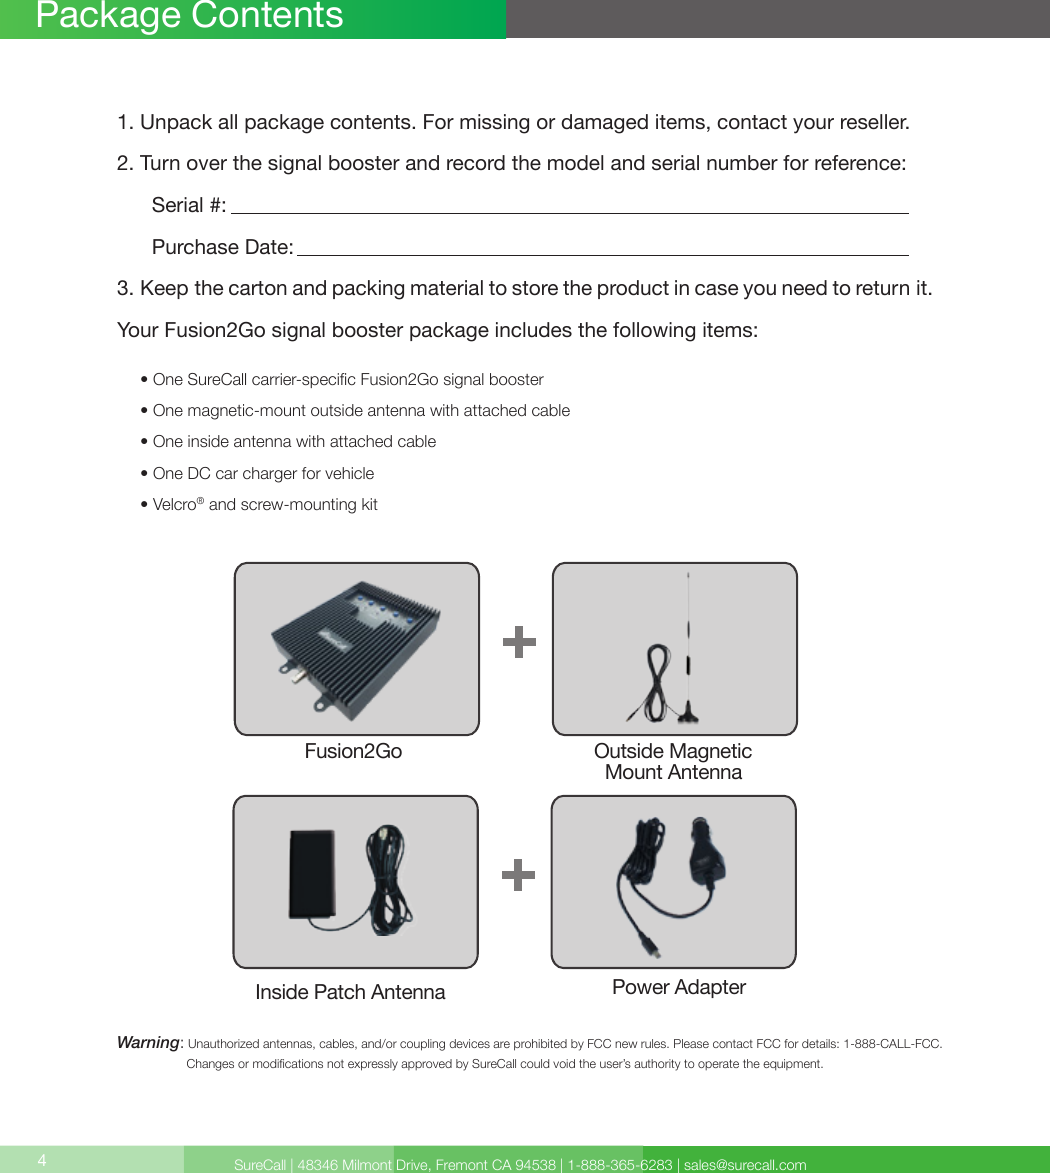 SureCall | 48346 Milmont Drive, Fremont CA 94538 | 1-888-365-6283 | sales@surecall.com4Package Contents1. Unpack all package contents. For missing or damaged items, contact your reseller.2. Turn over the signal booster and record the model and serial number for reference:      Serial #:          Purchase Date:  3. Keep the carton and packing material to store the product in case you need to return it.Your Fusion2Go signal booster package includes the following items:     • One SureCall carrier-specic Fusion2Go signal booster     • One magnetic-mount outside antenna with attached cable     • One inside antenna with attached cable     • One DC car charger for vehicle     • Velcro® and screw-mounting kitWarning:   Unauthorized antennas, cables, and/or coupling devices are prohibited by FCC new rules. Please contact FCC for details: 1-888-CALL-FCC.                     Changes or modications not expressly approved by SureCall could void the user’s authority to operate the equipment.Fusion2Go Outside Magnetic   Mount AntennaInside Patch Antenna Power Adapter